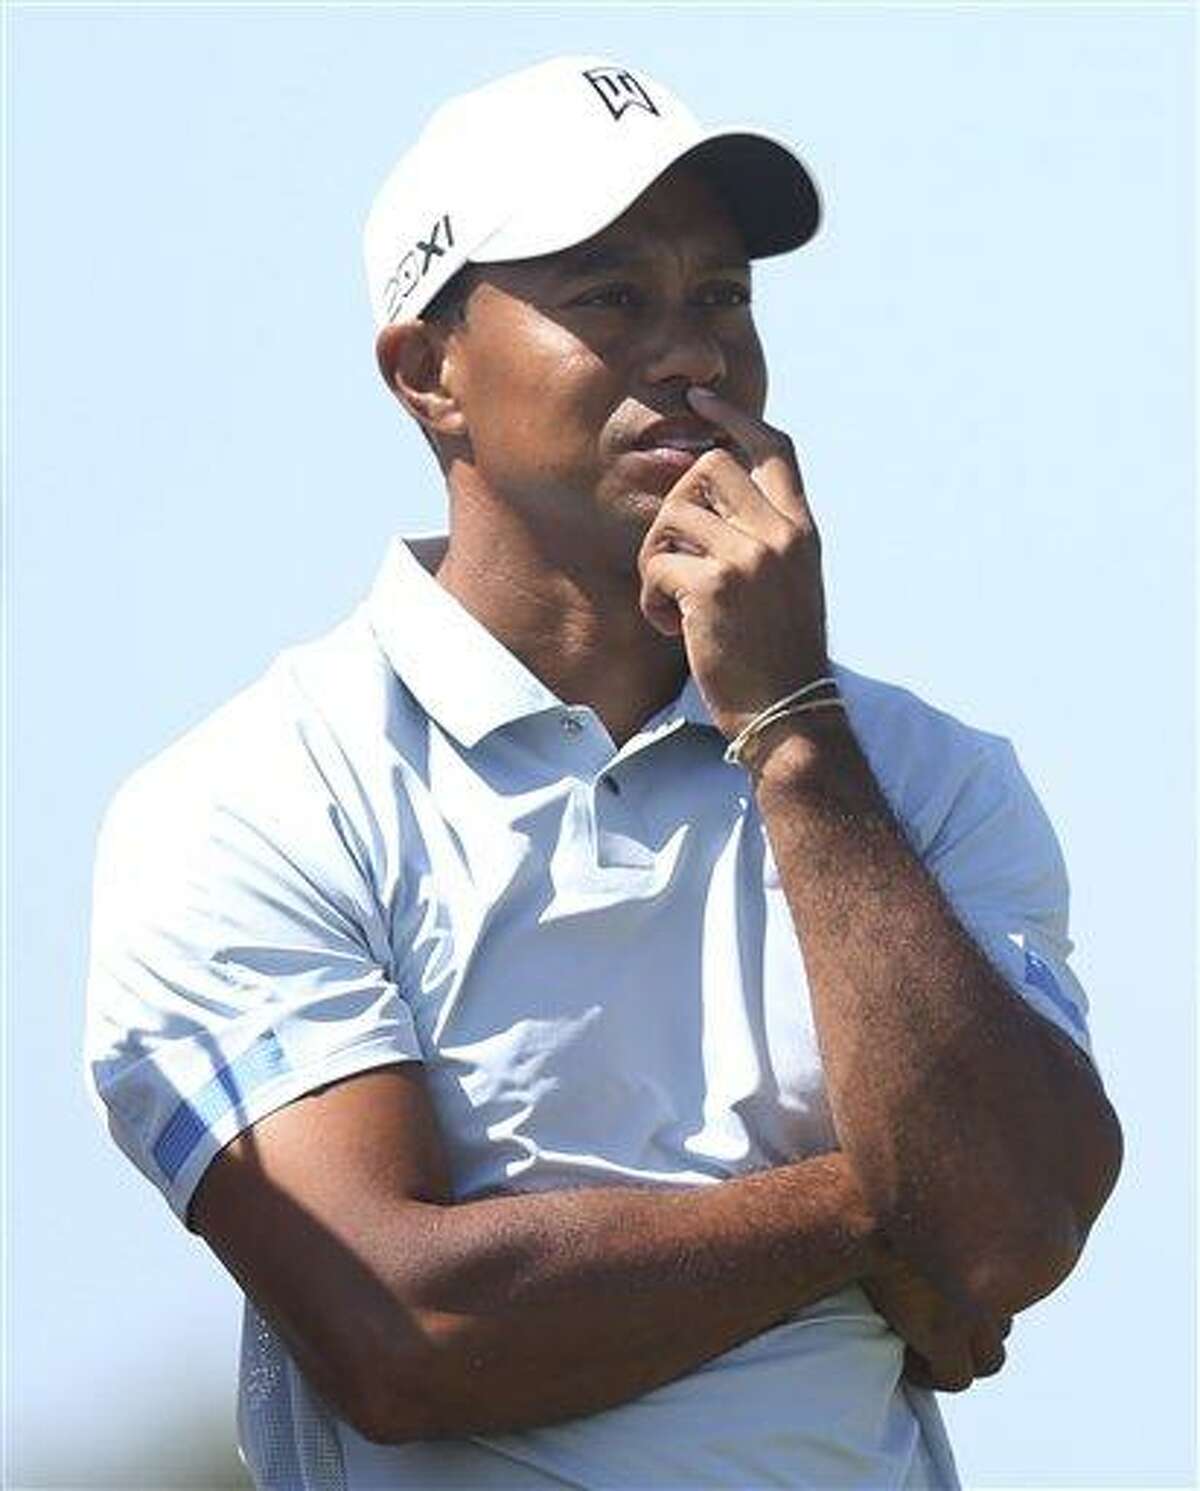 Tiger Woods of the United States prepares to play a shot off the 15th tee during the second round of the British Open Golf Championship at Muirfield, Scotland, Friday July 19, 2013. (AP Photo/Scott Heppell)